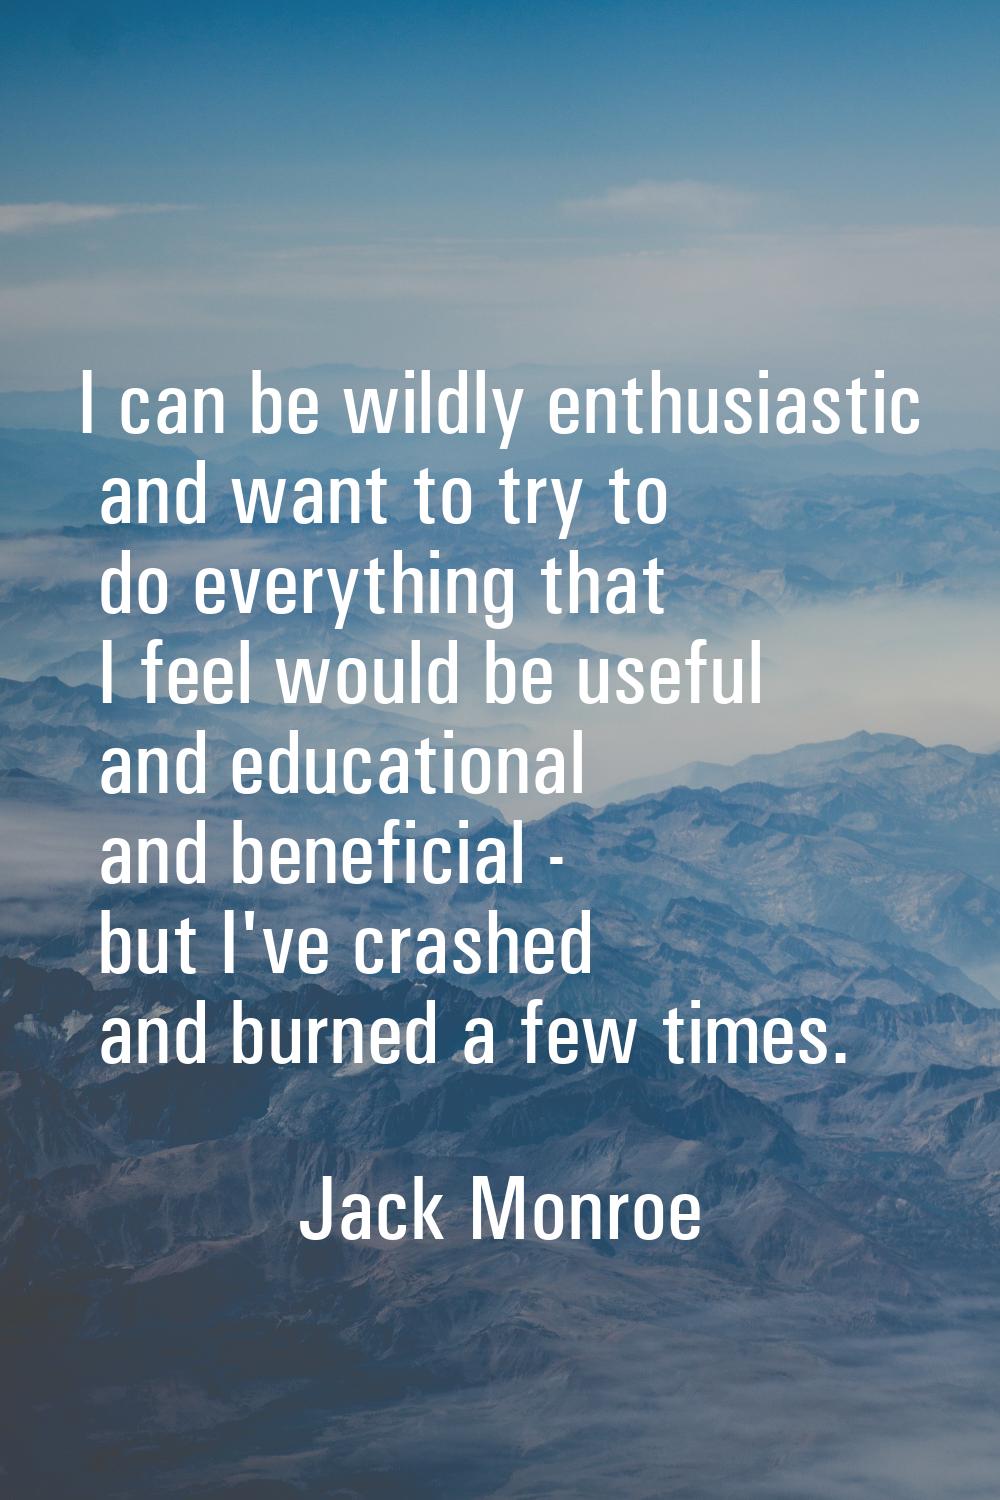 I can be wildly enthusiastic and want to try to do everything that I feel would be useful and educa